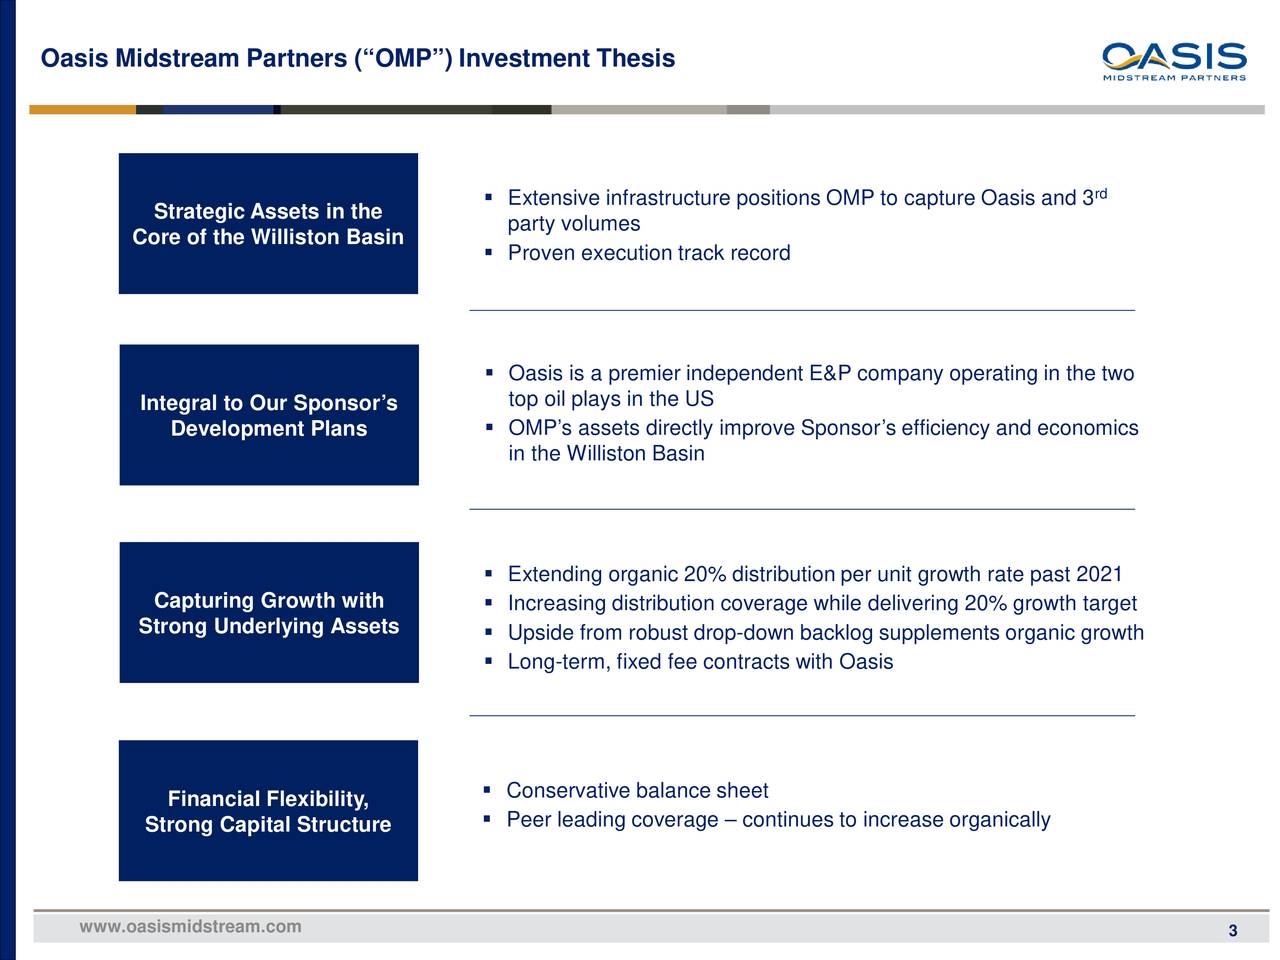 Oasis Midstream Partners (“OMP”) Investment Thesis